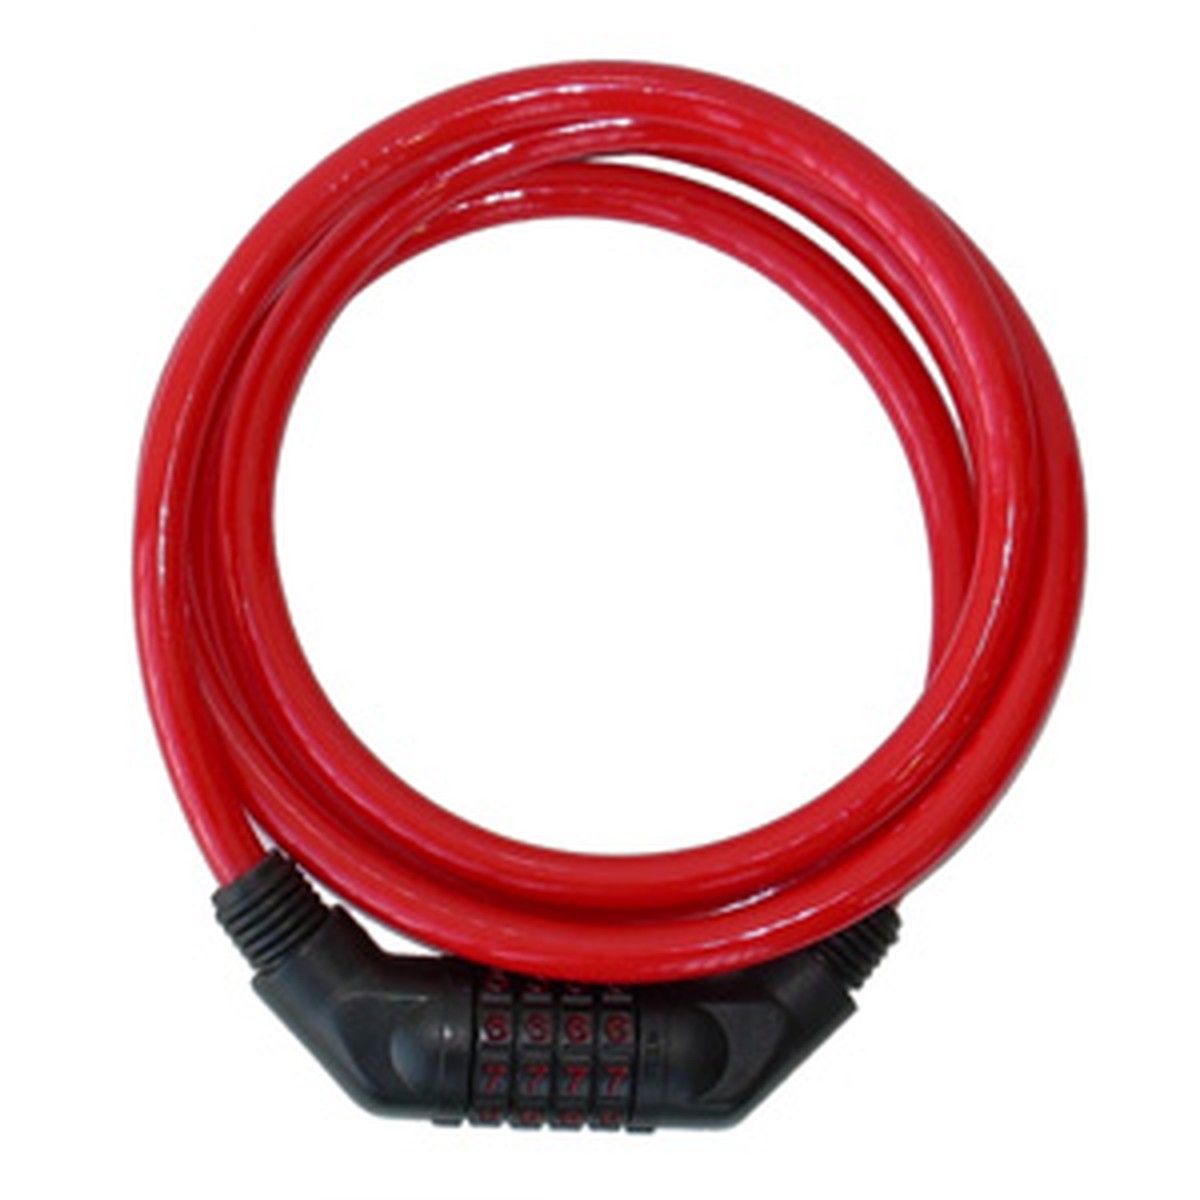 The Club 6' x 3/8" Resettable Bicycle Cable Lock